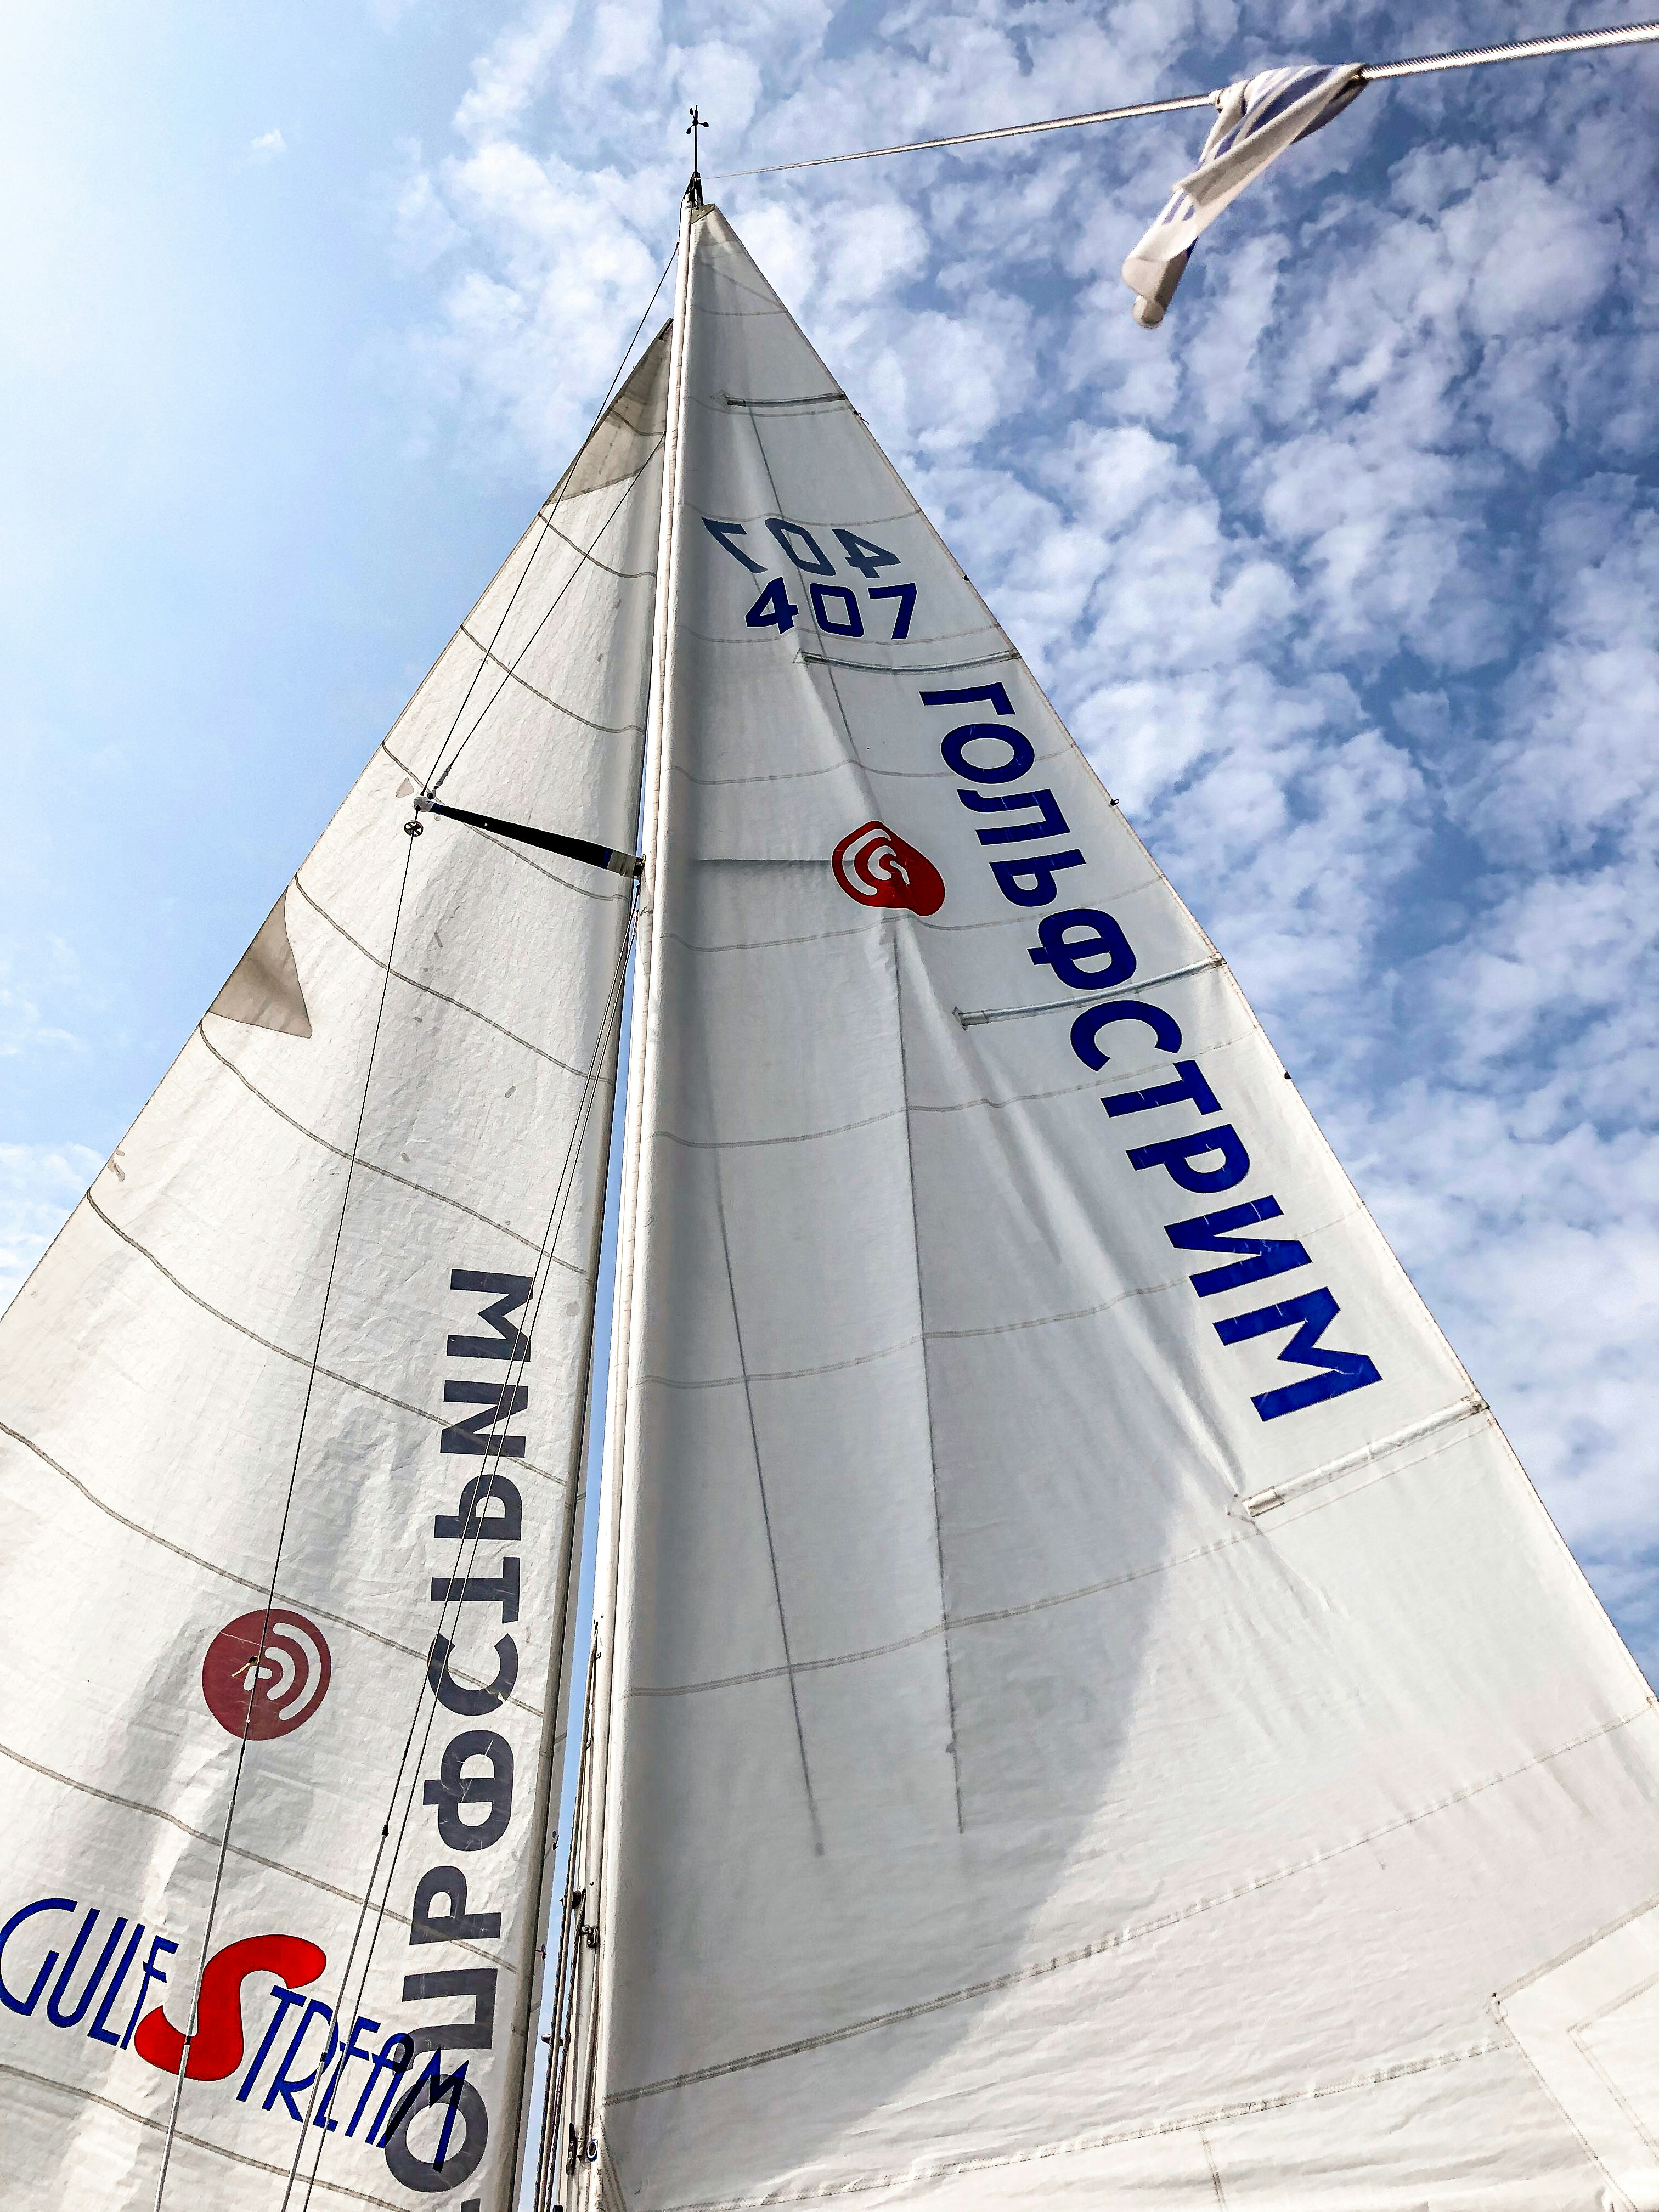 white sail boat on mid air under blue sky and white clouds during daytime